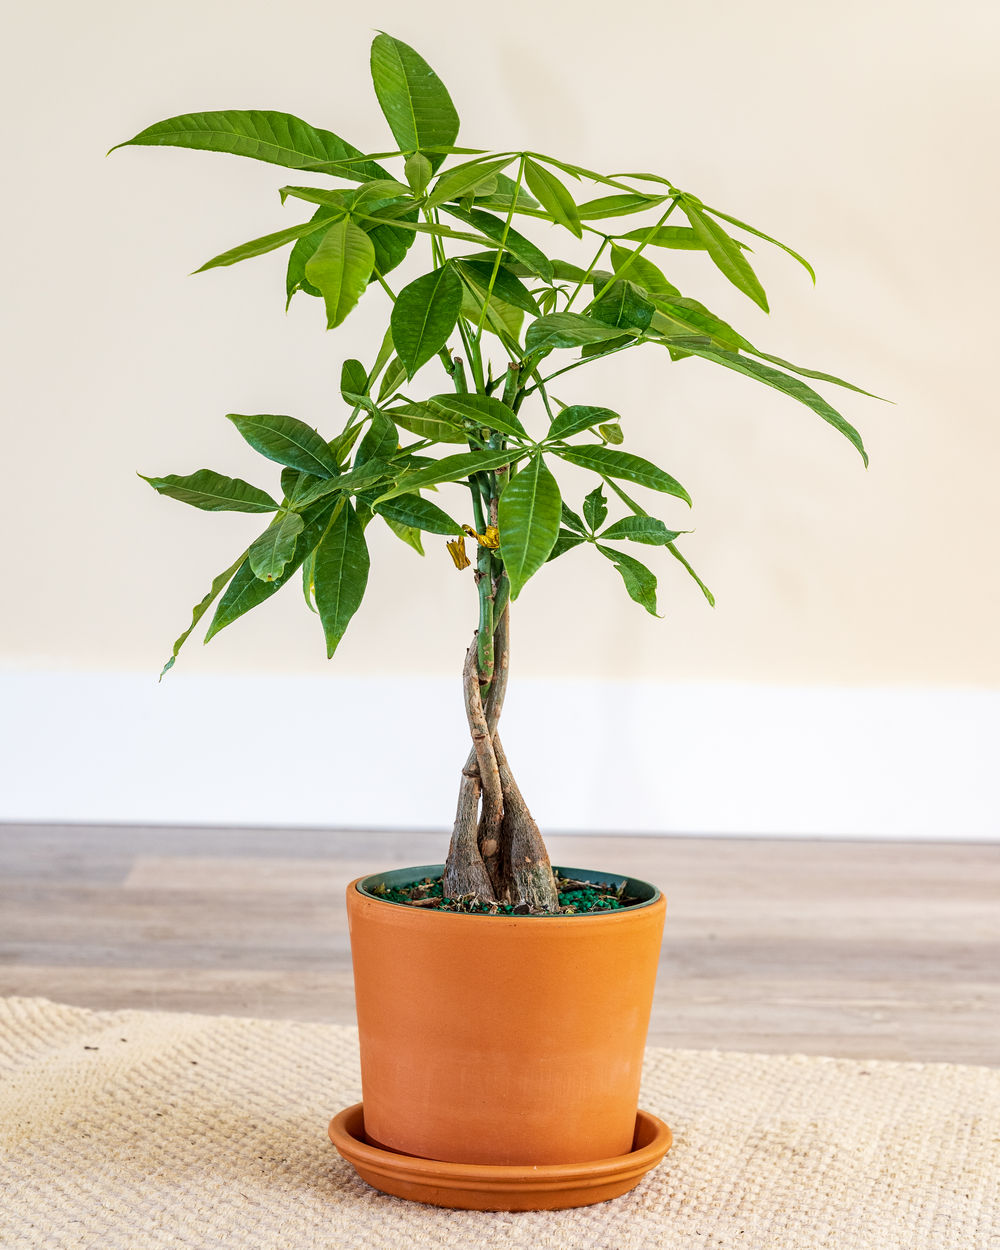 where can i get a money tree